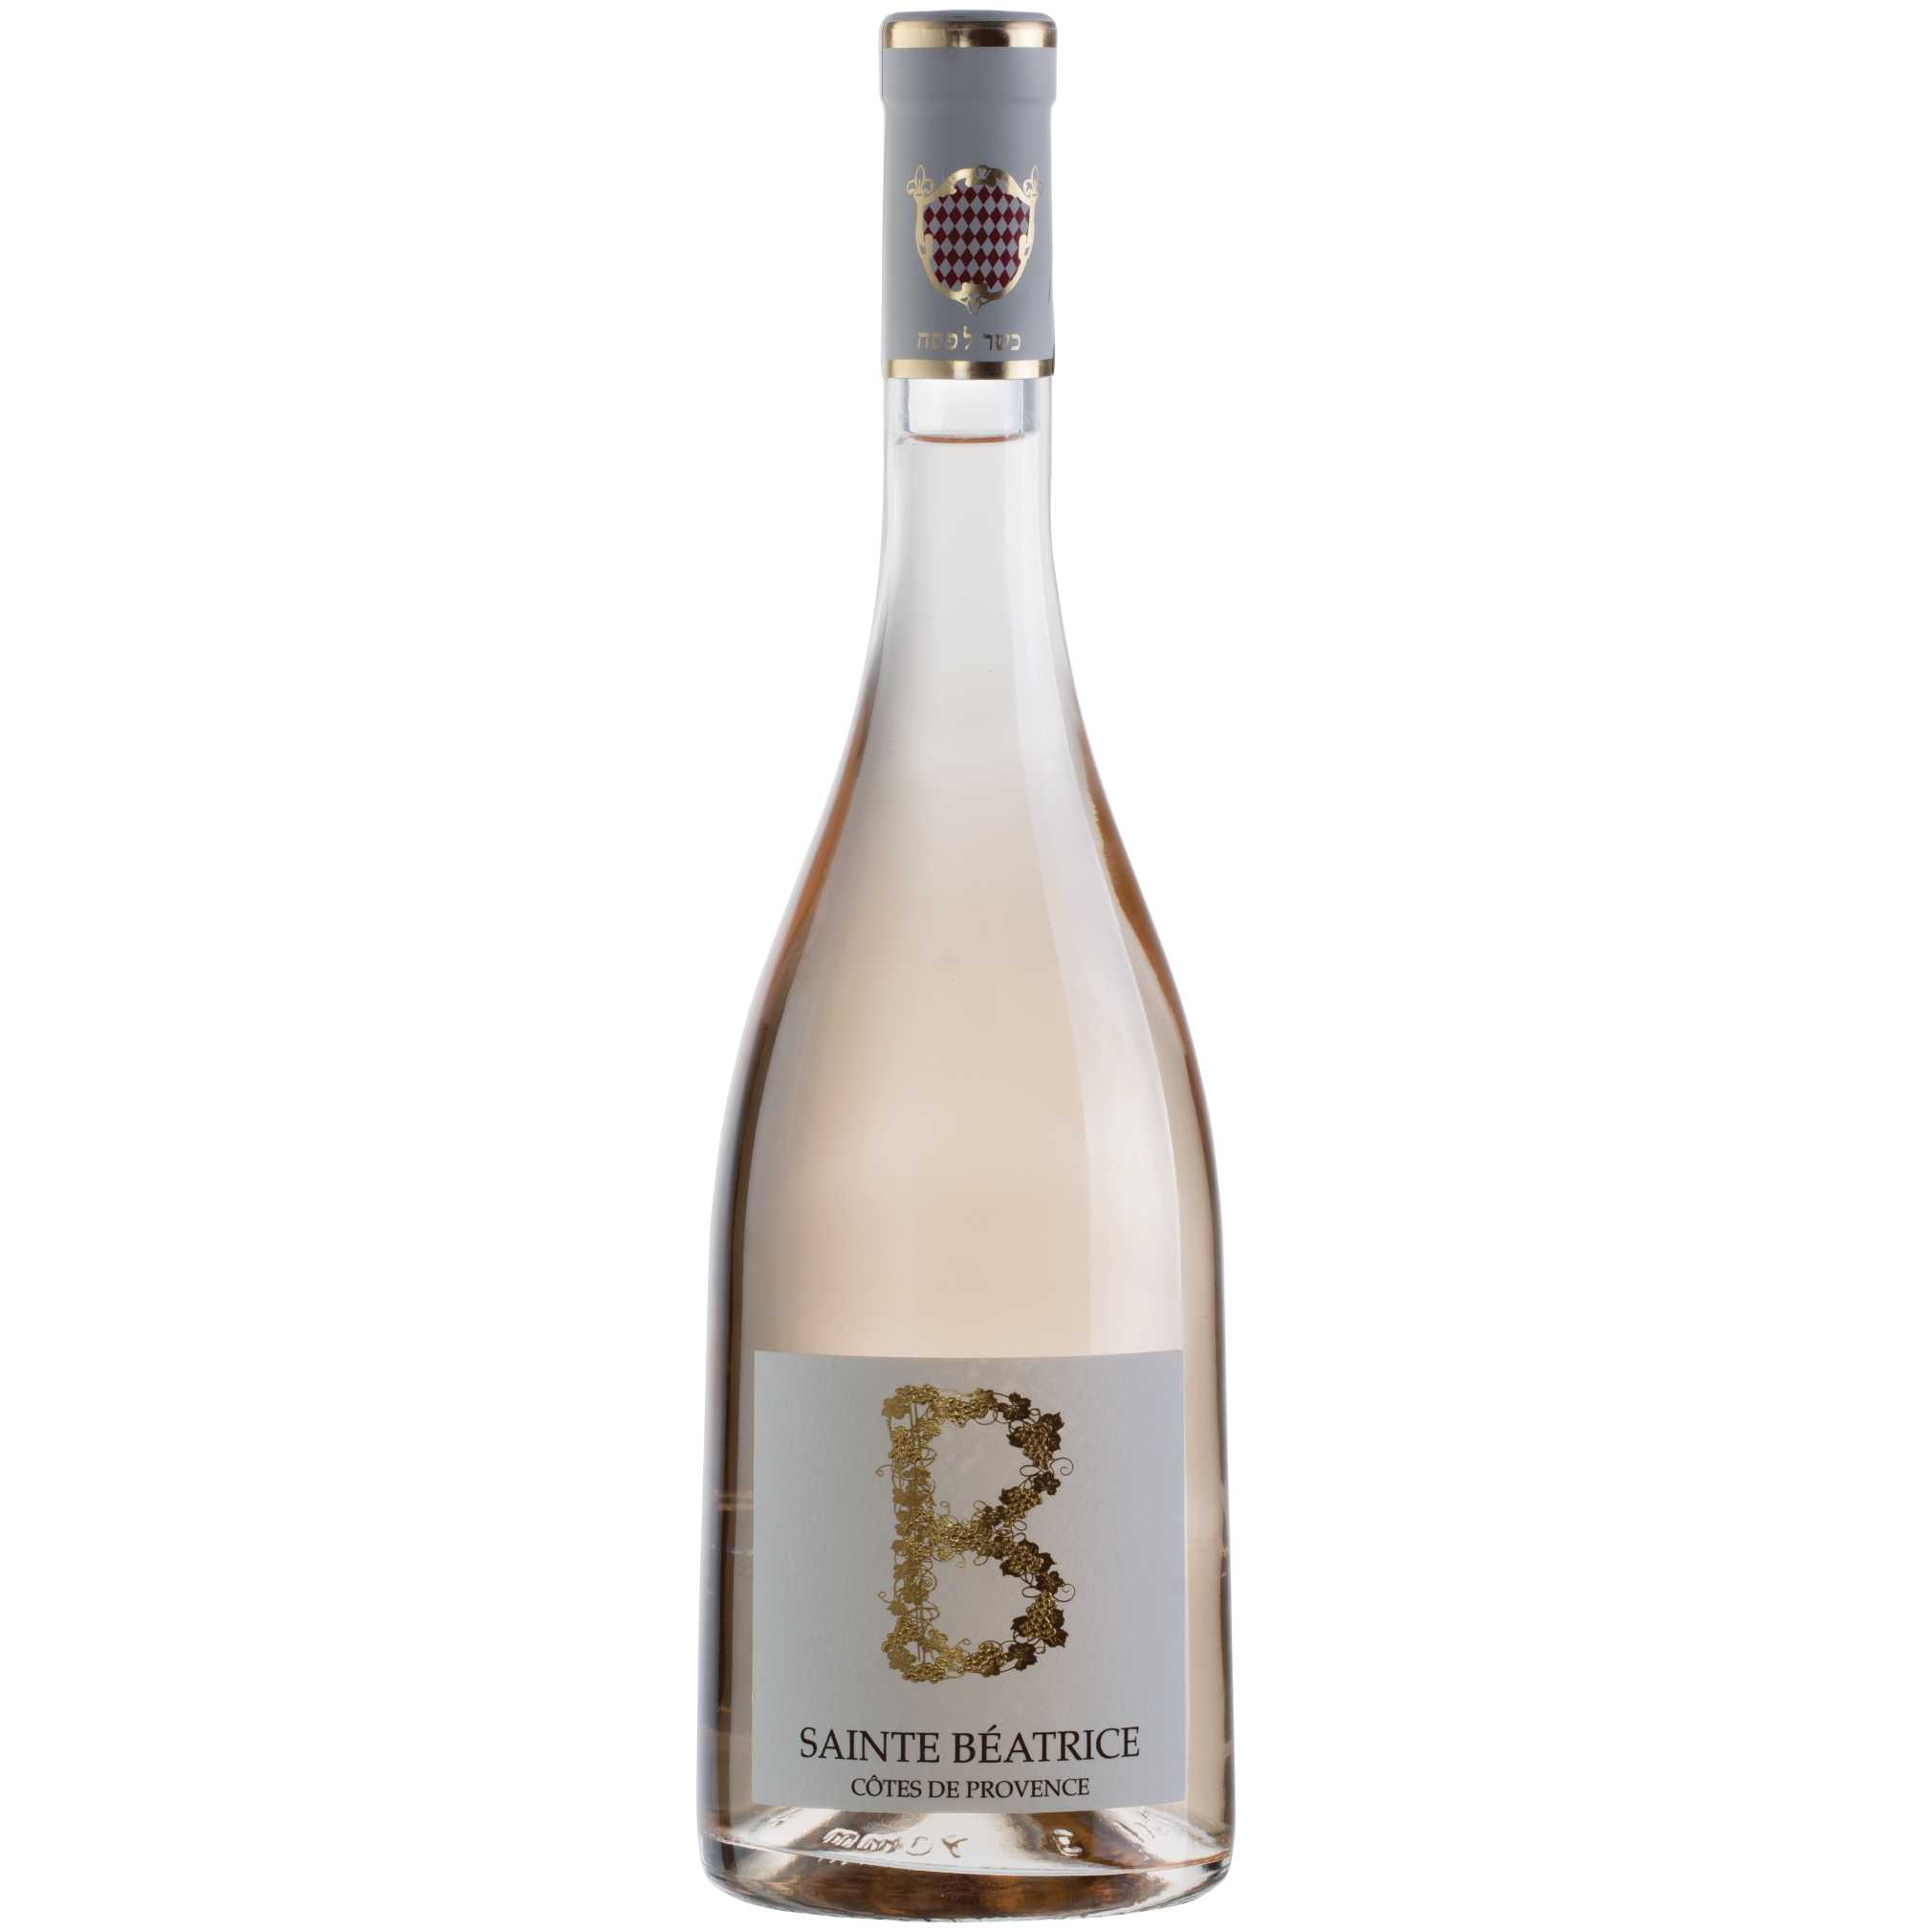 Sainte Beatrice Instant B Rose - A Kosher Wine From France